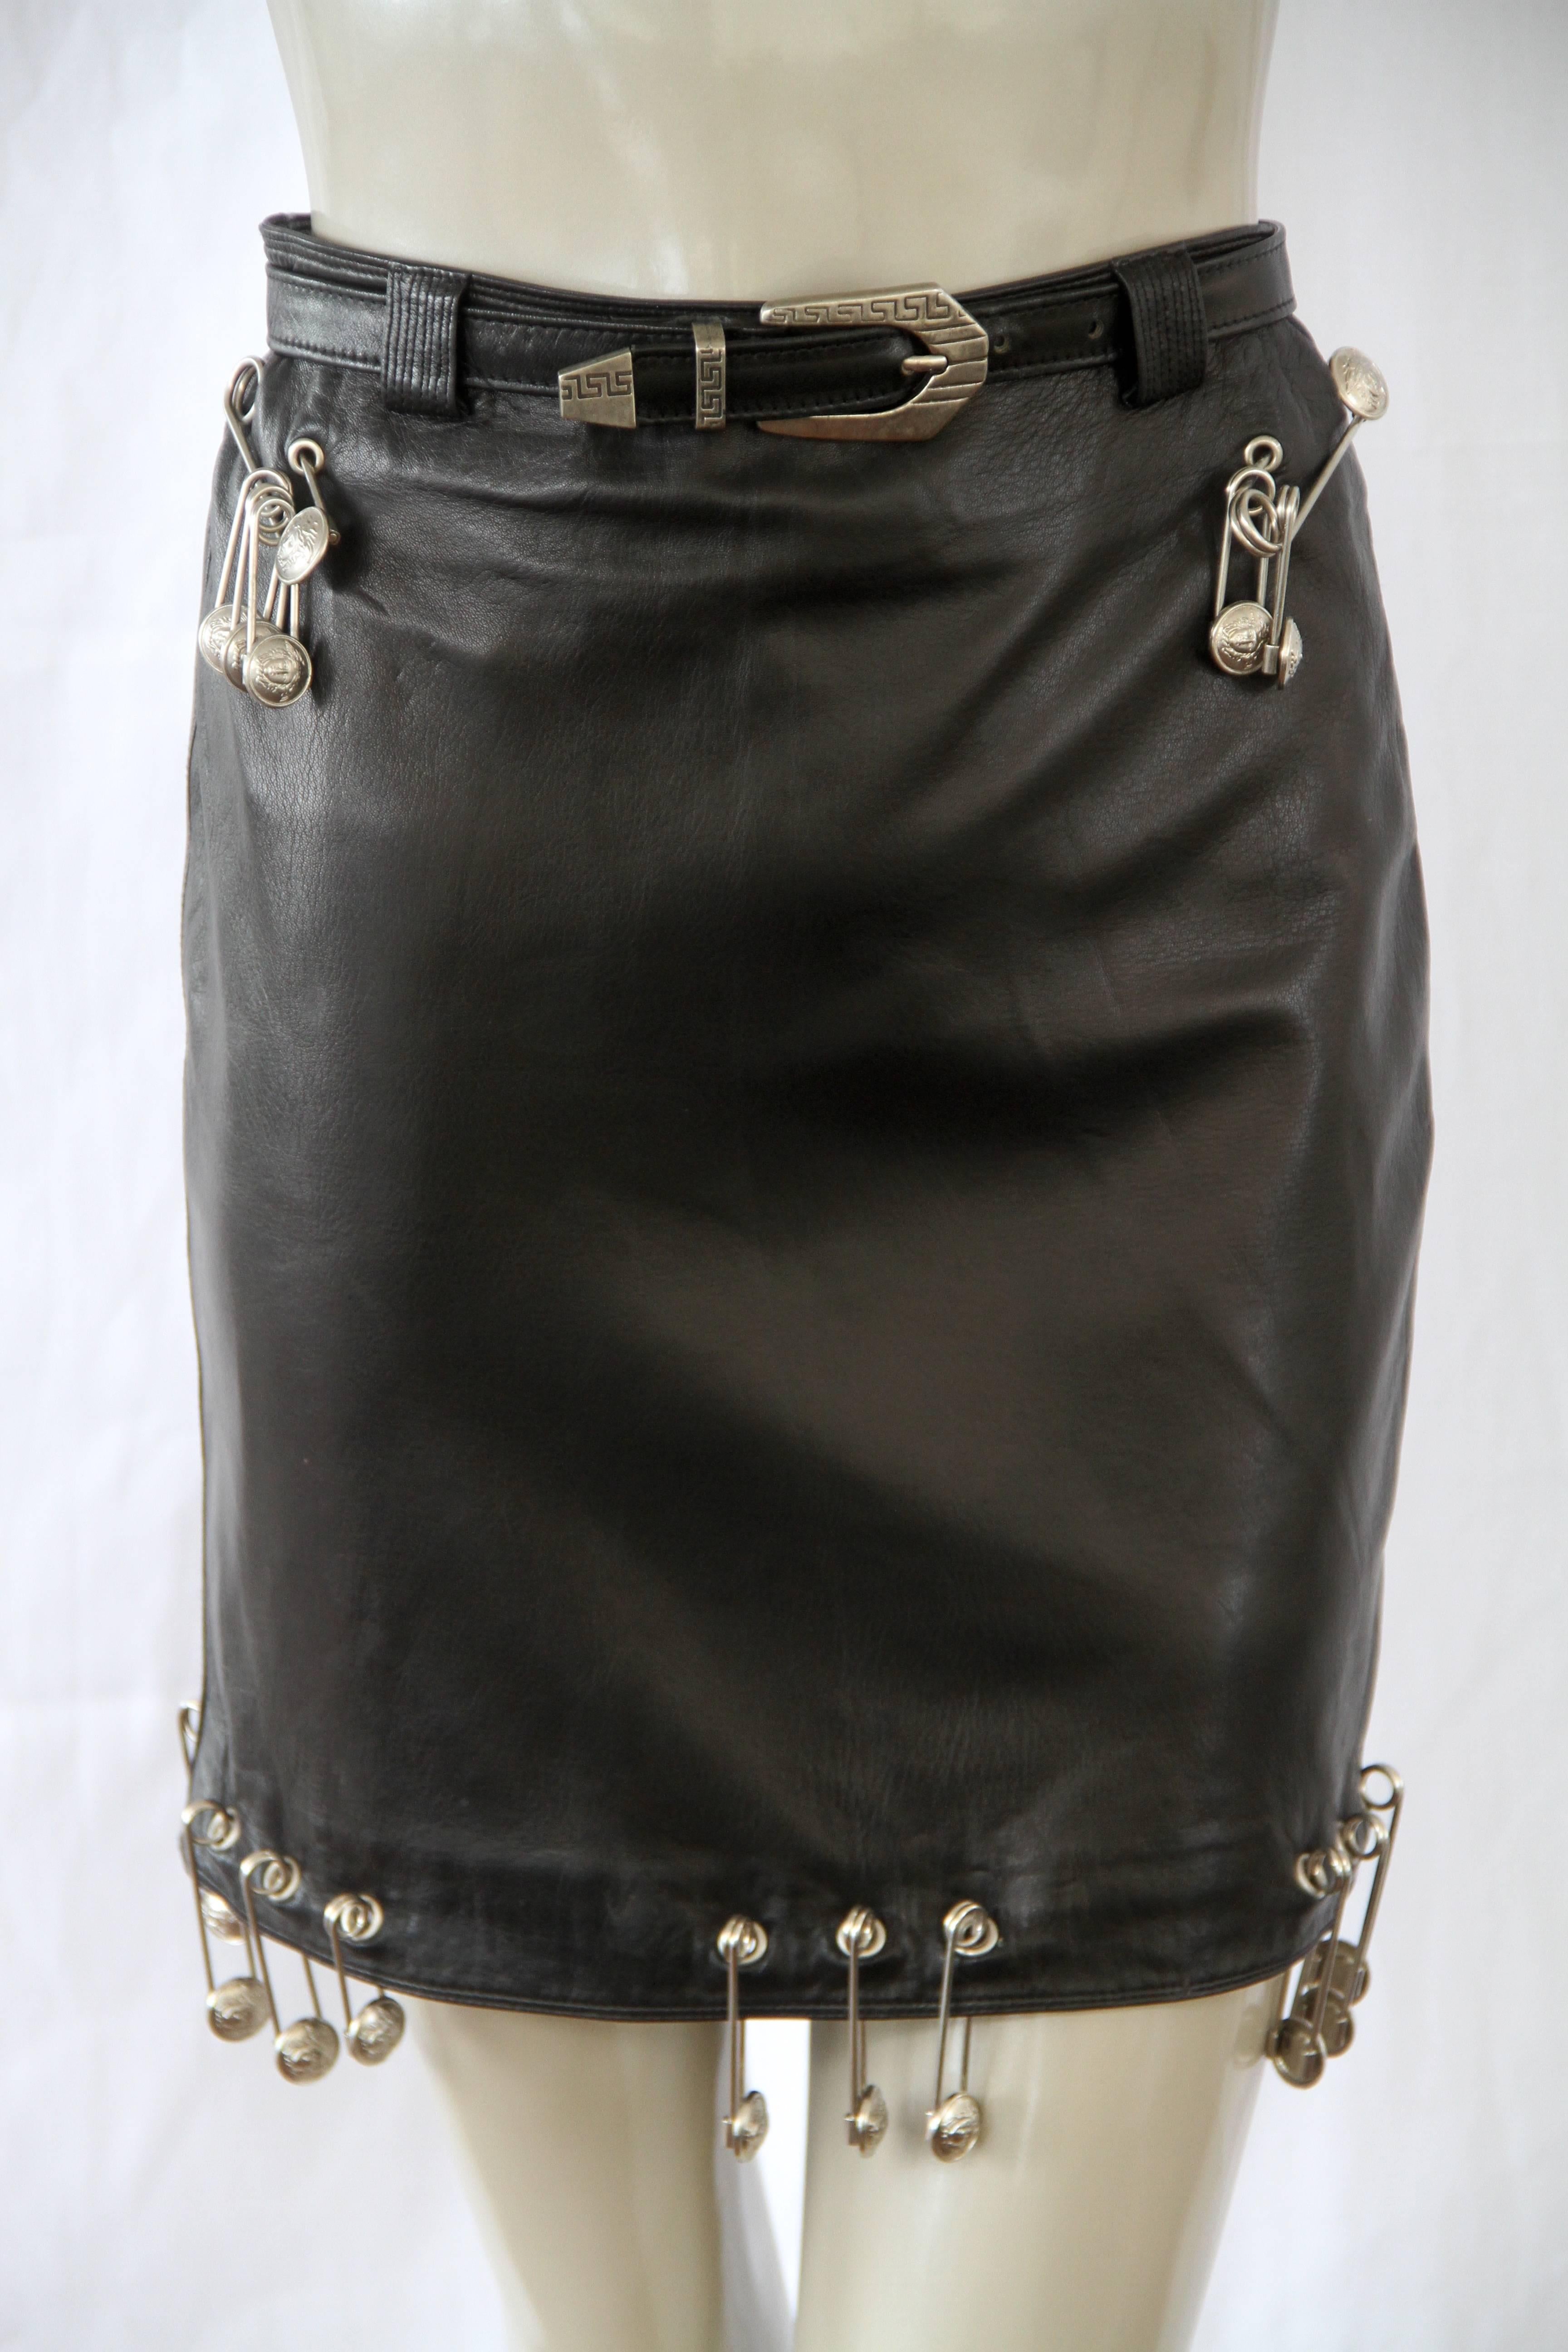 Iconic Gianni Versace black leather mini skirt, adorned with silver tone metal safety pins, from the Spring 1994 Punk collection.

Marked an Italian size 38.

Manufacturer - Ruffo S.p.a.

Fabric content - 100% leather,